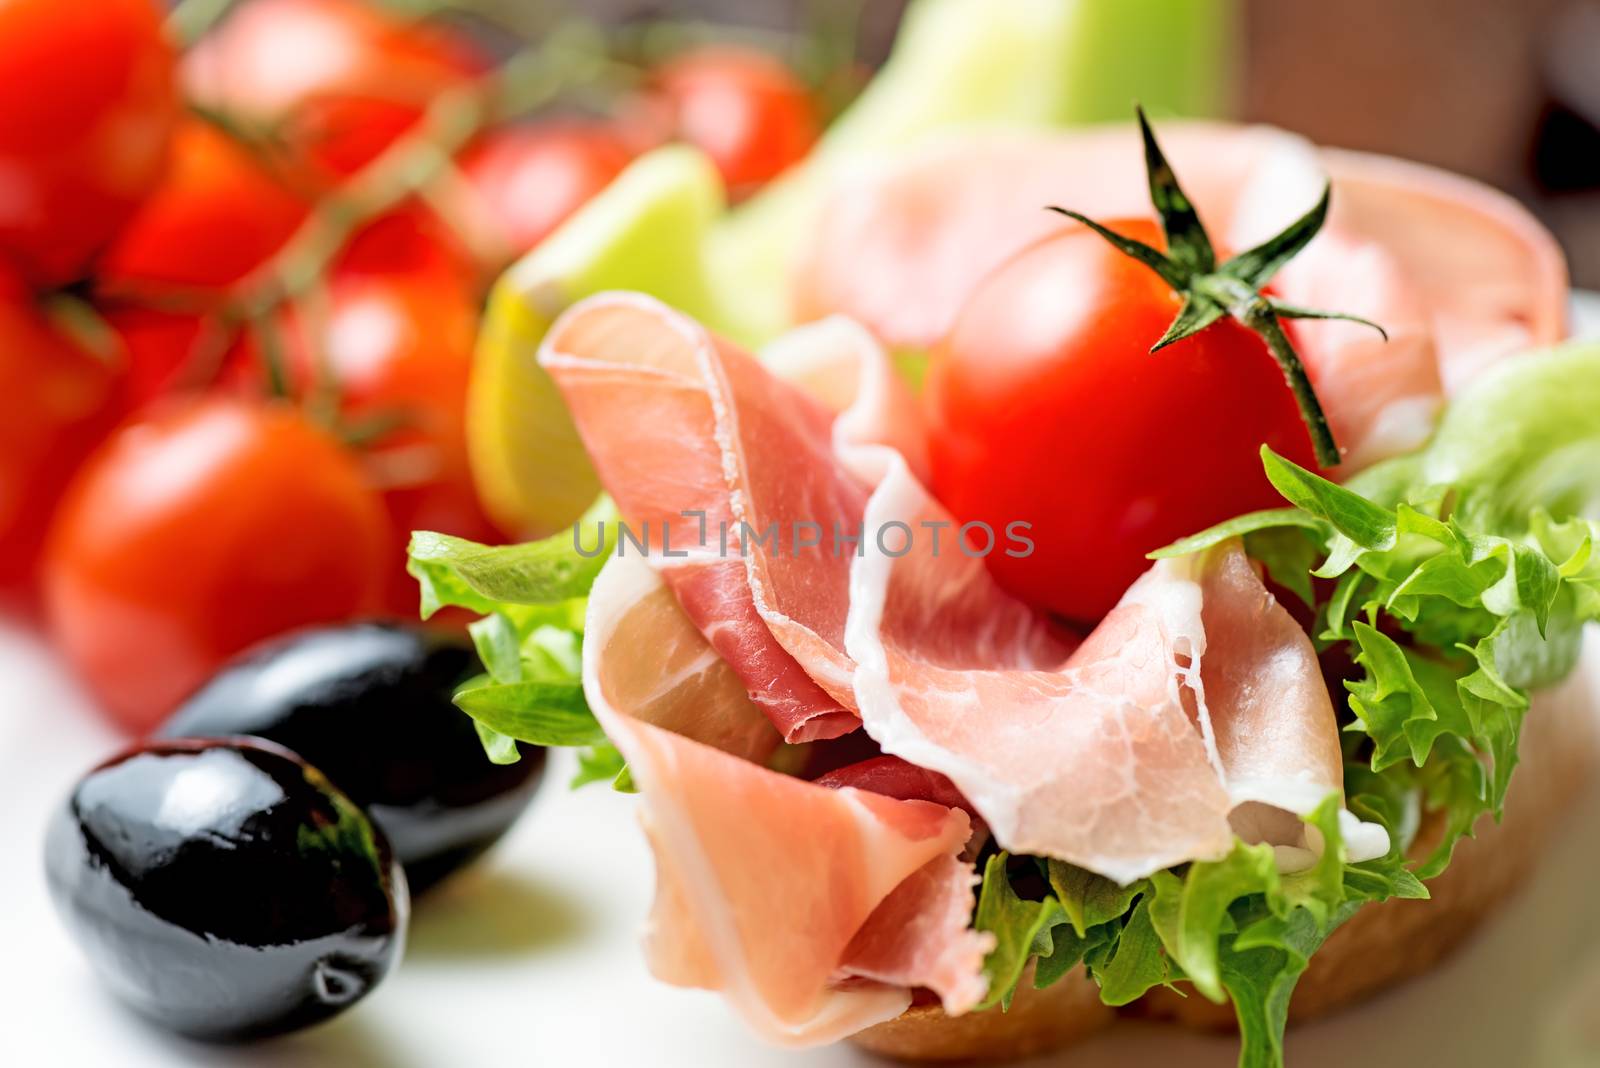 thin slices of prosciutto with mixed olives and tomato on bread